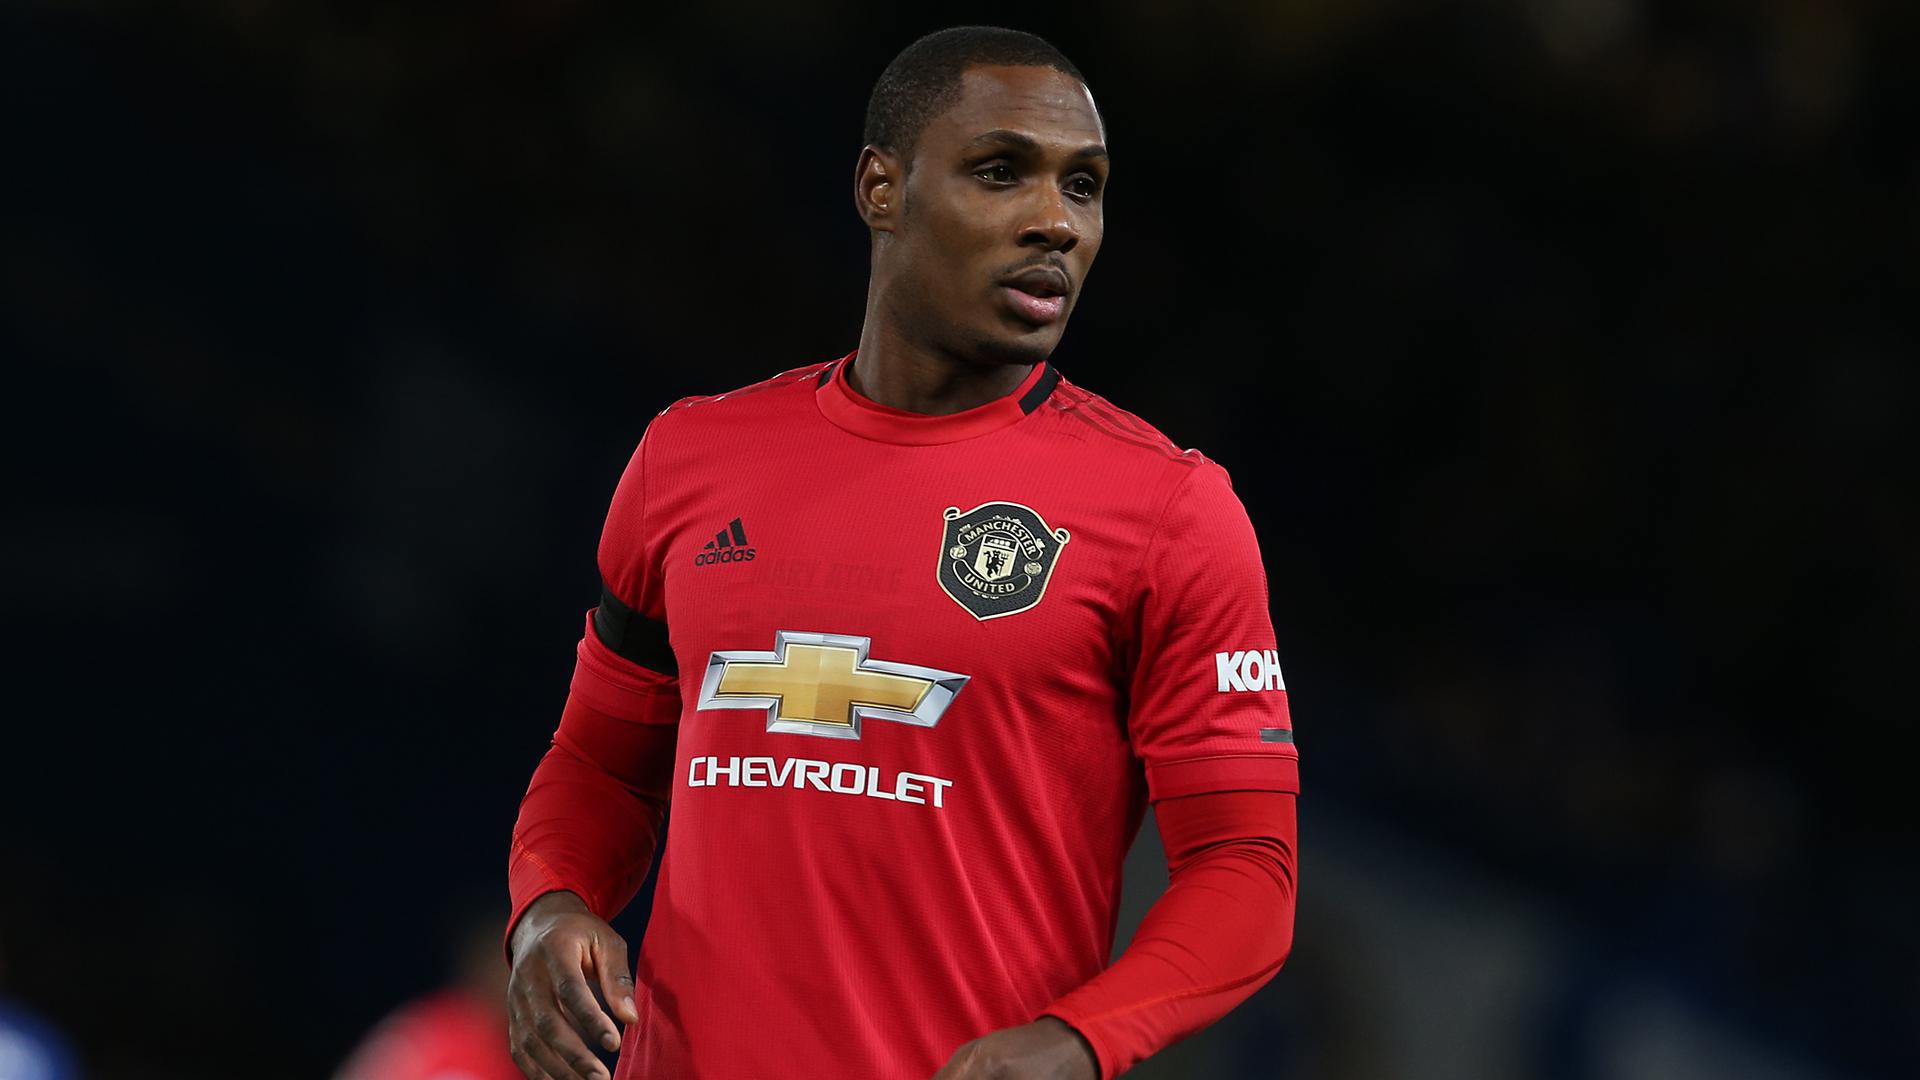 Odion Ighalo chance during Man Utd debut against Chelsea | Manchester ...